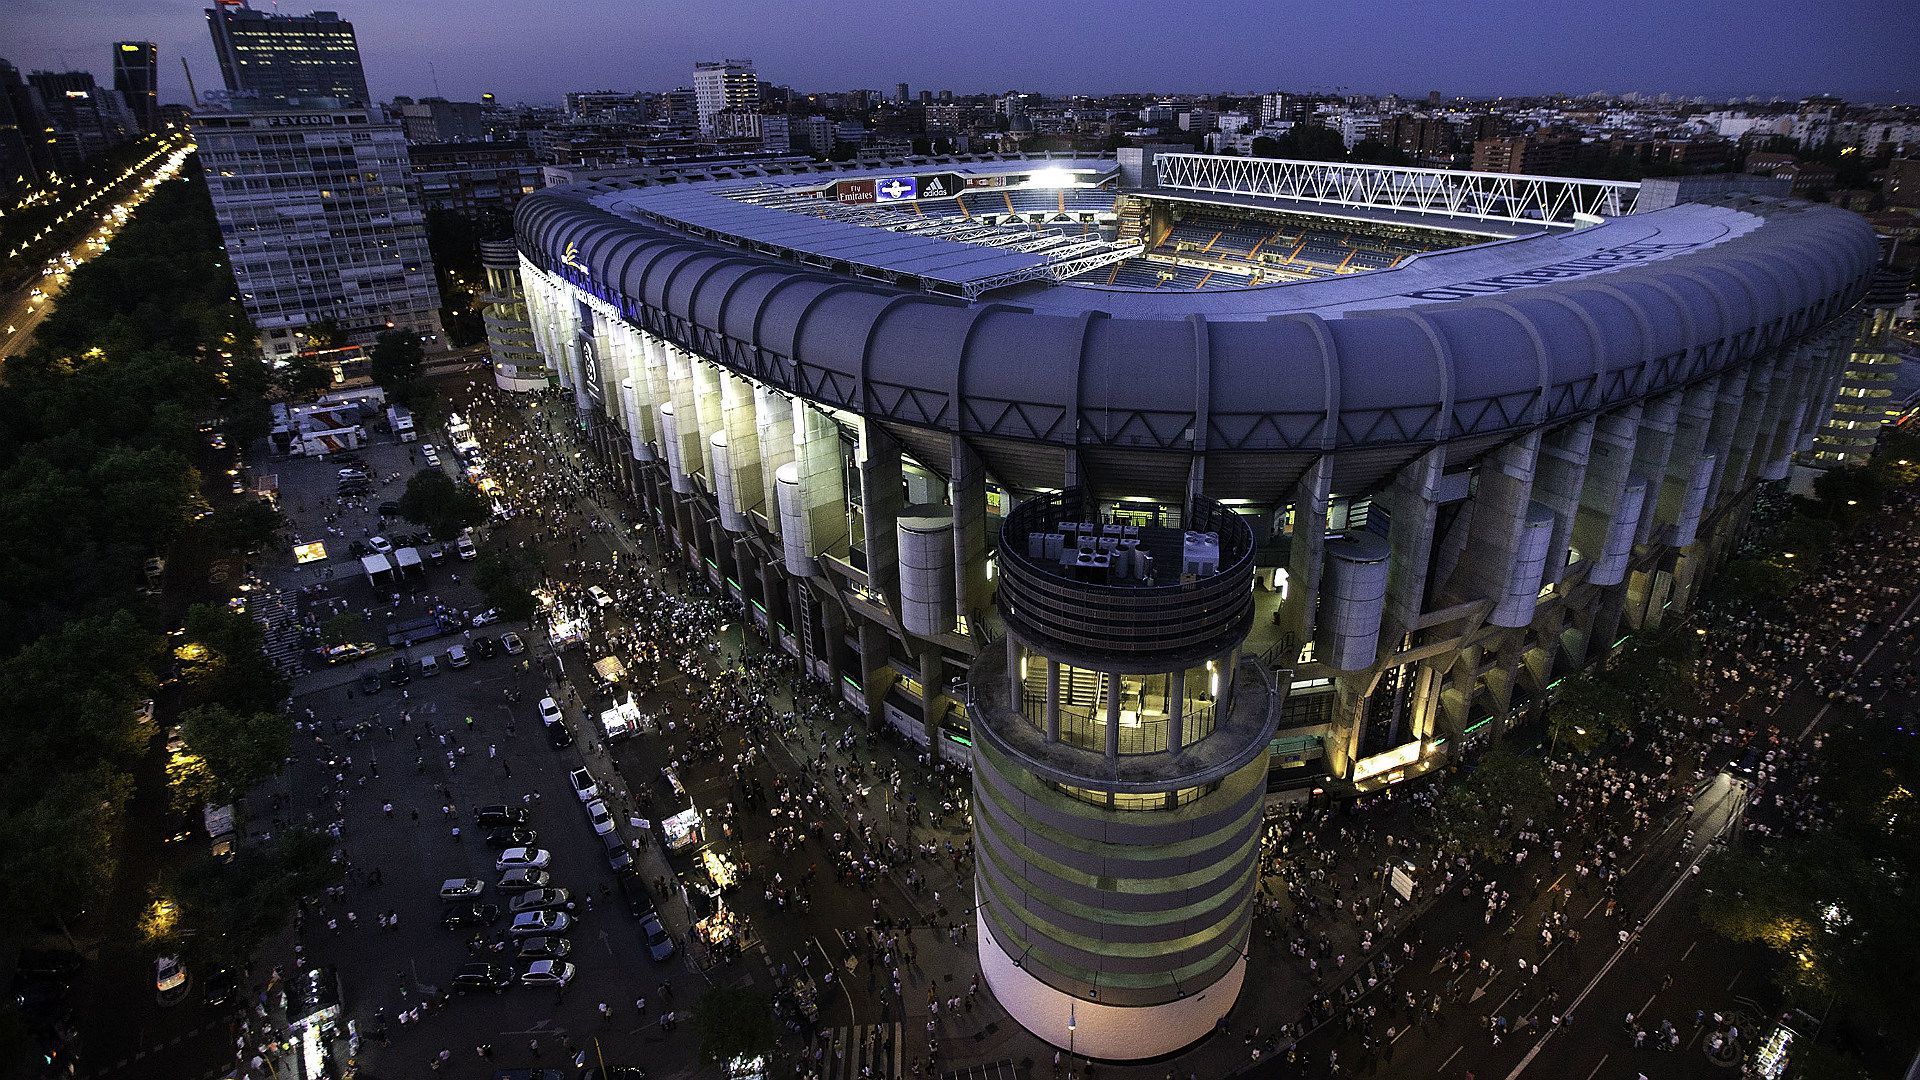 How The Retractable Pitch Of The New Santiago Bernabéu Will Work